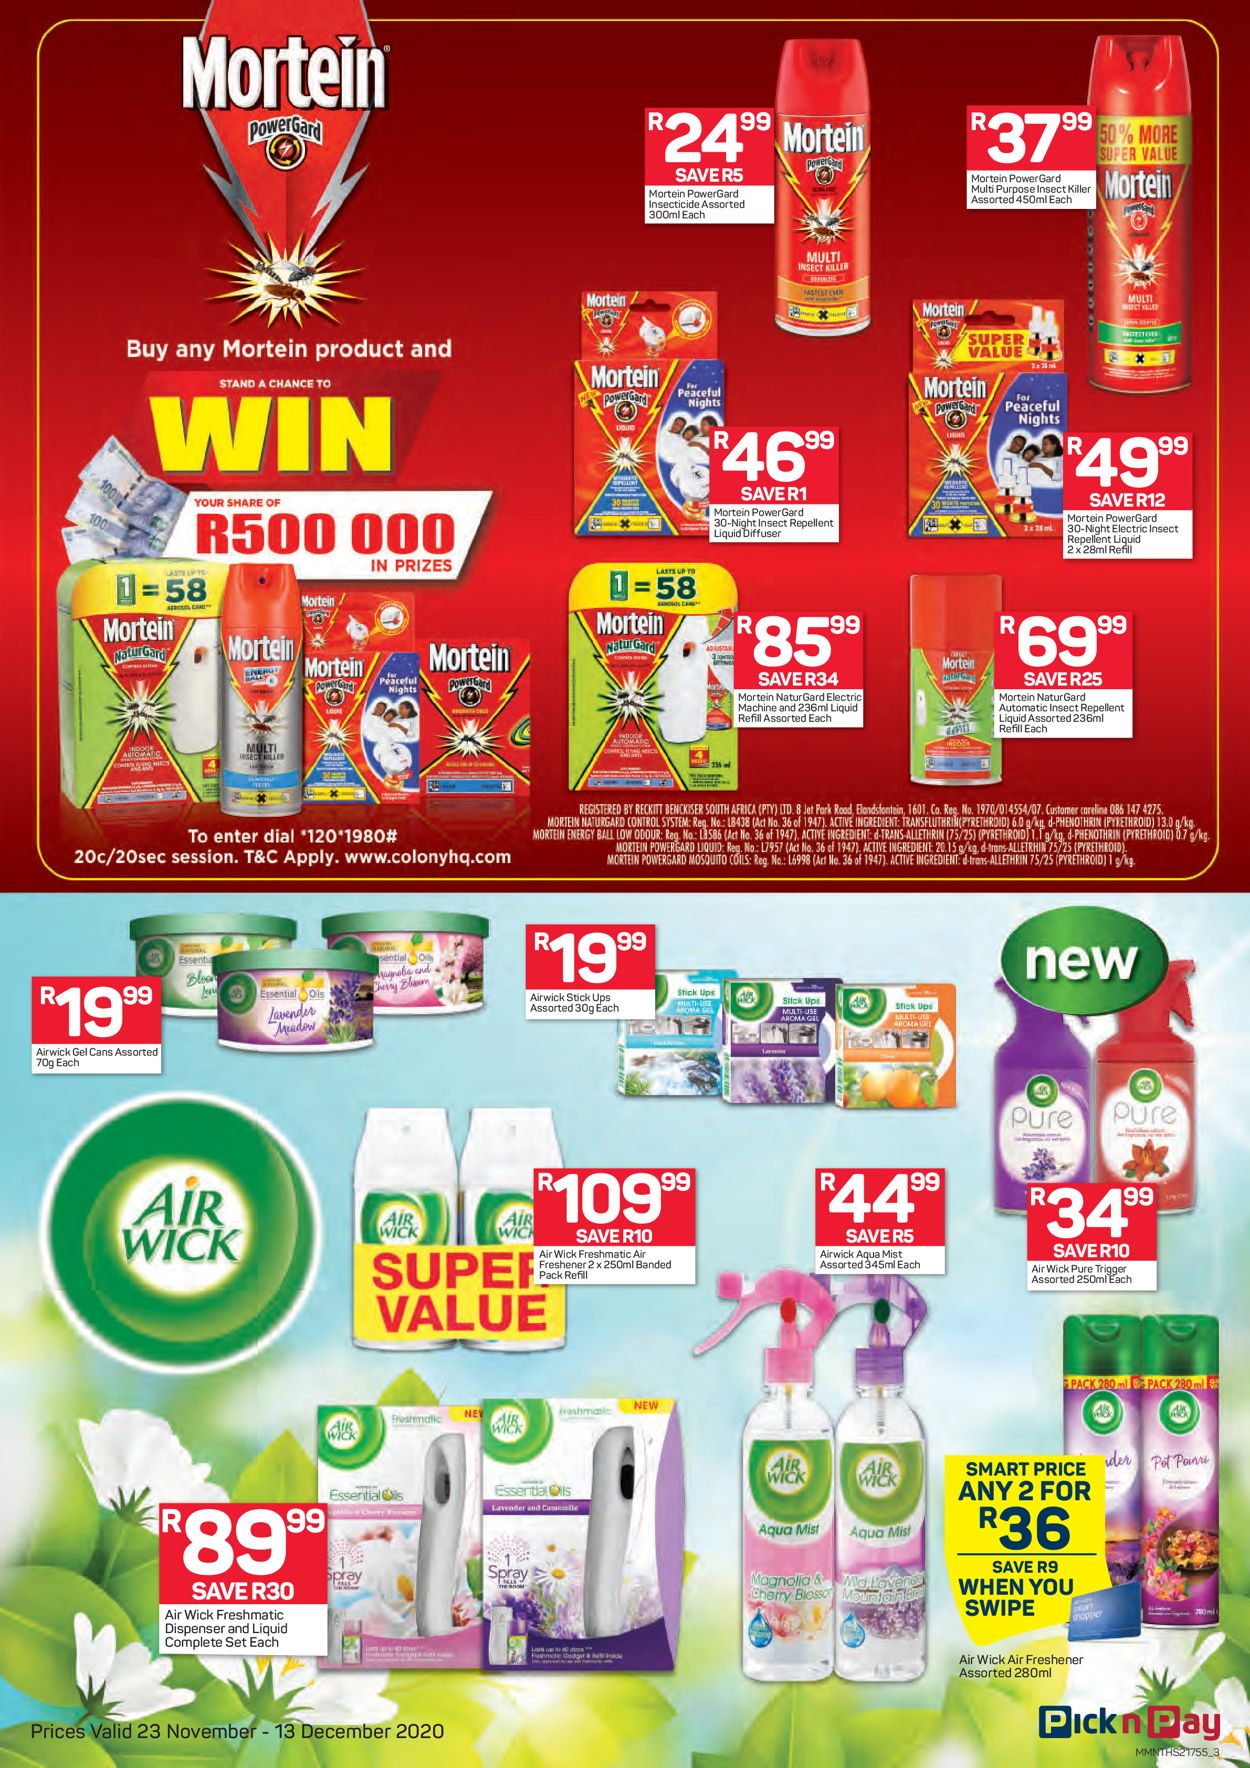 Pick n Pay Catalogue - 2020/11/23-2020/12/13 (Page 3)